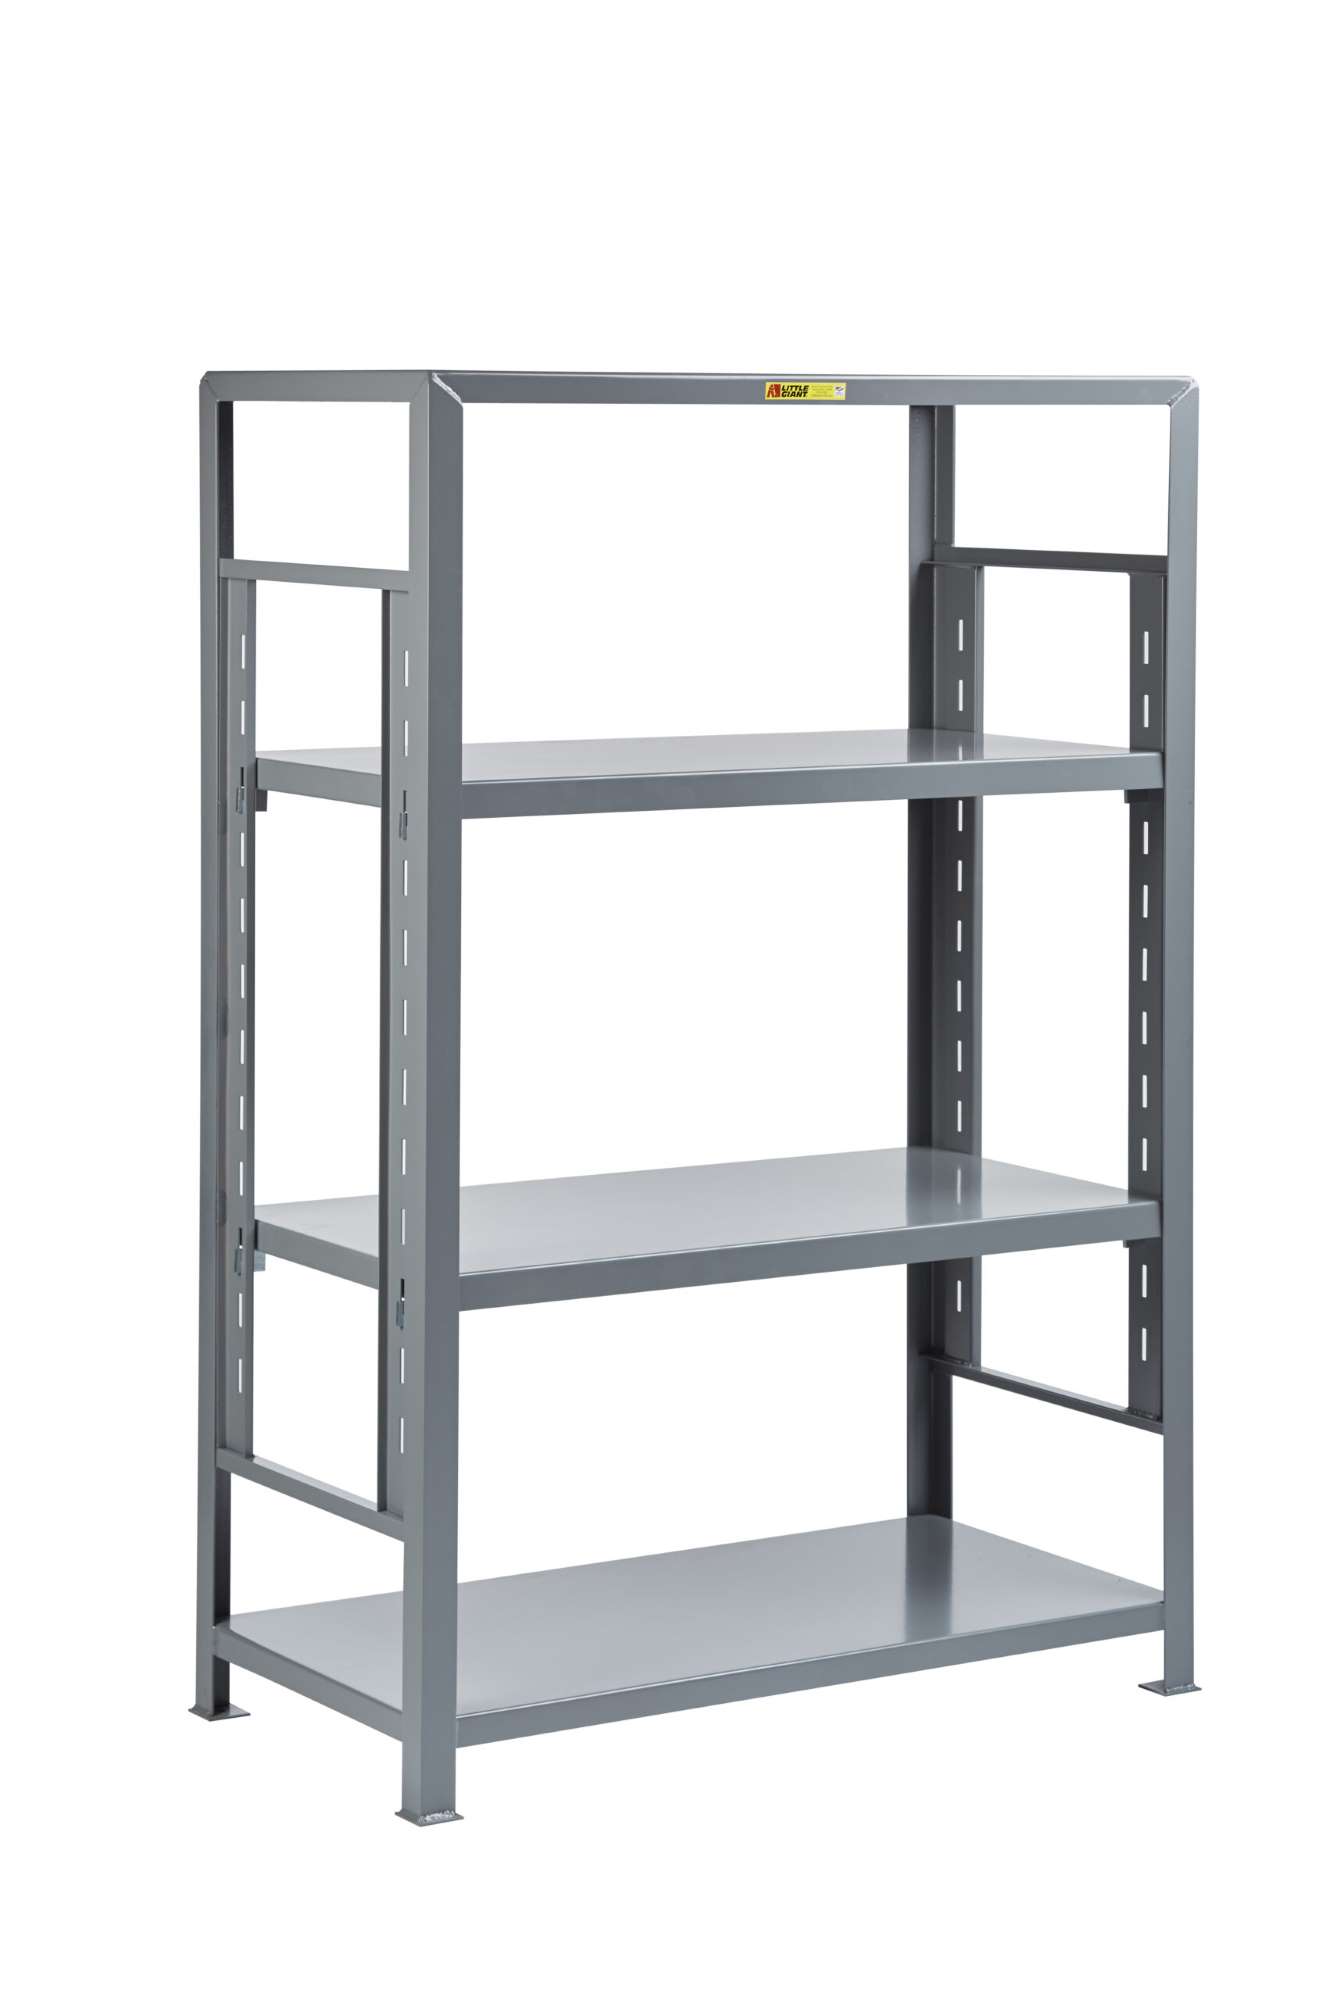 Little Giant adjustable steel shelving, 1500 lbs shelf capacity, 12ga reinforced shelves, Adjust in 3-1/2" increments, Available with 1,2,3 adjustable center shelves, 2x2x3/16 uprights, Overall height 72"